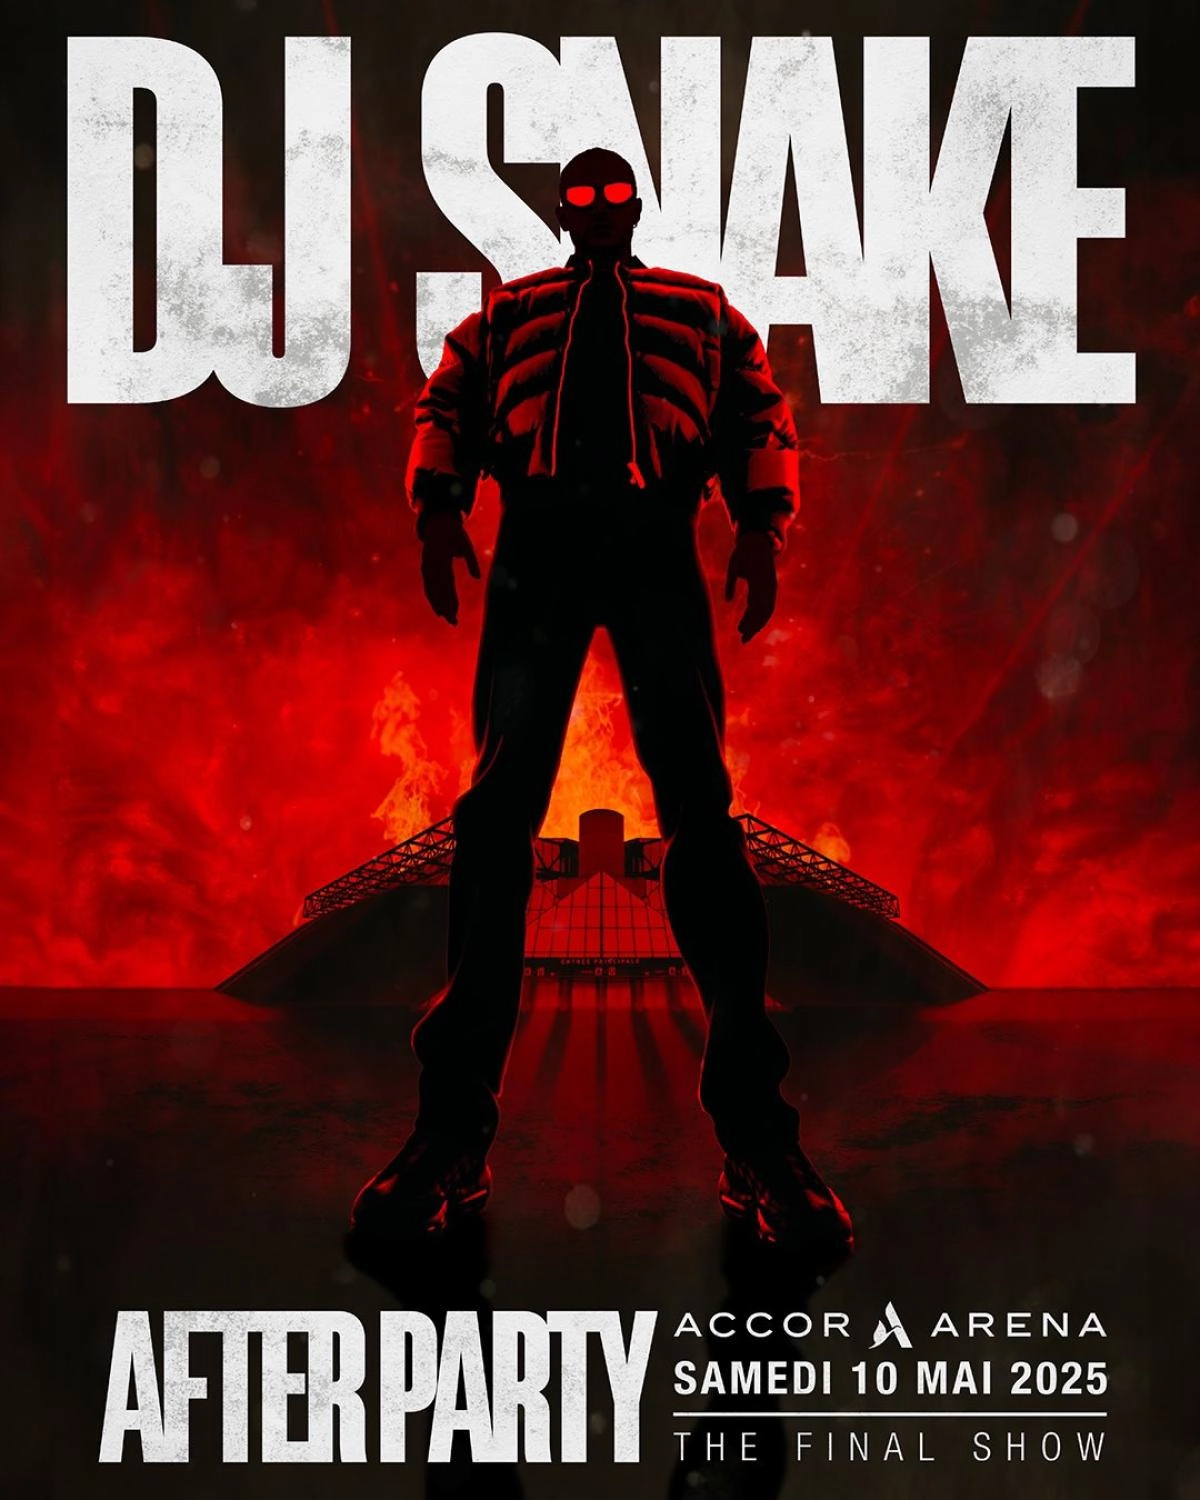 DJ Snake After Party at Accor Arena Tickets